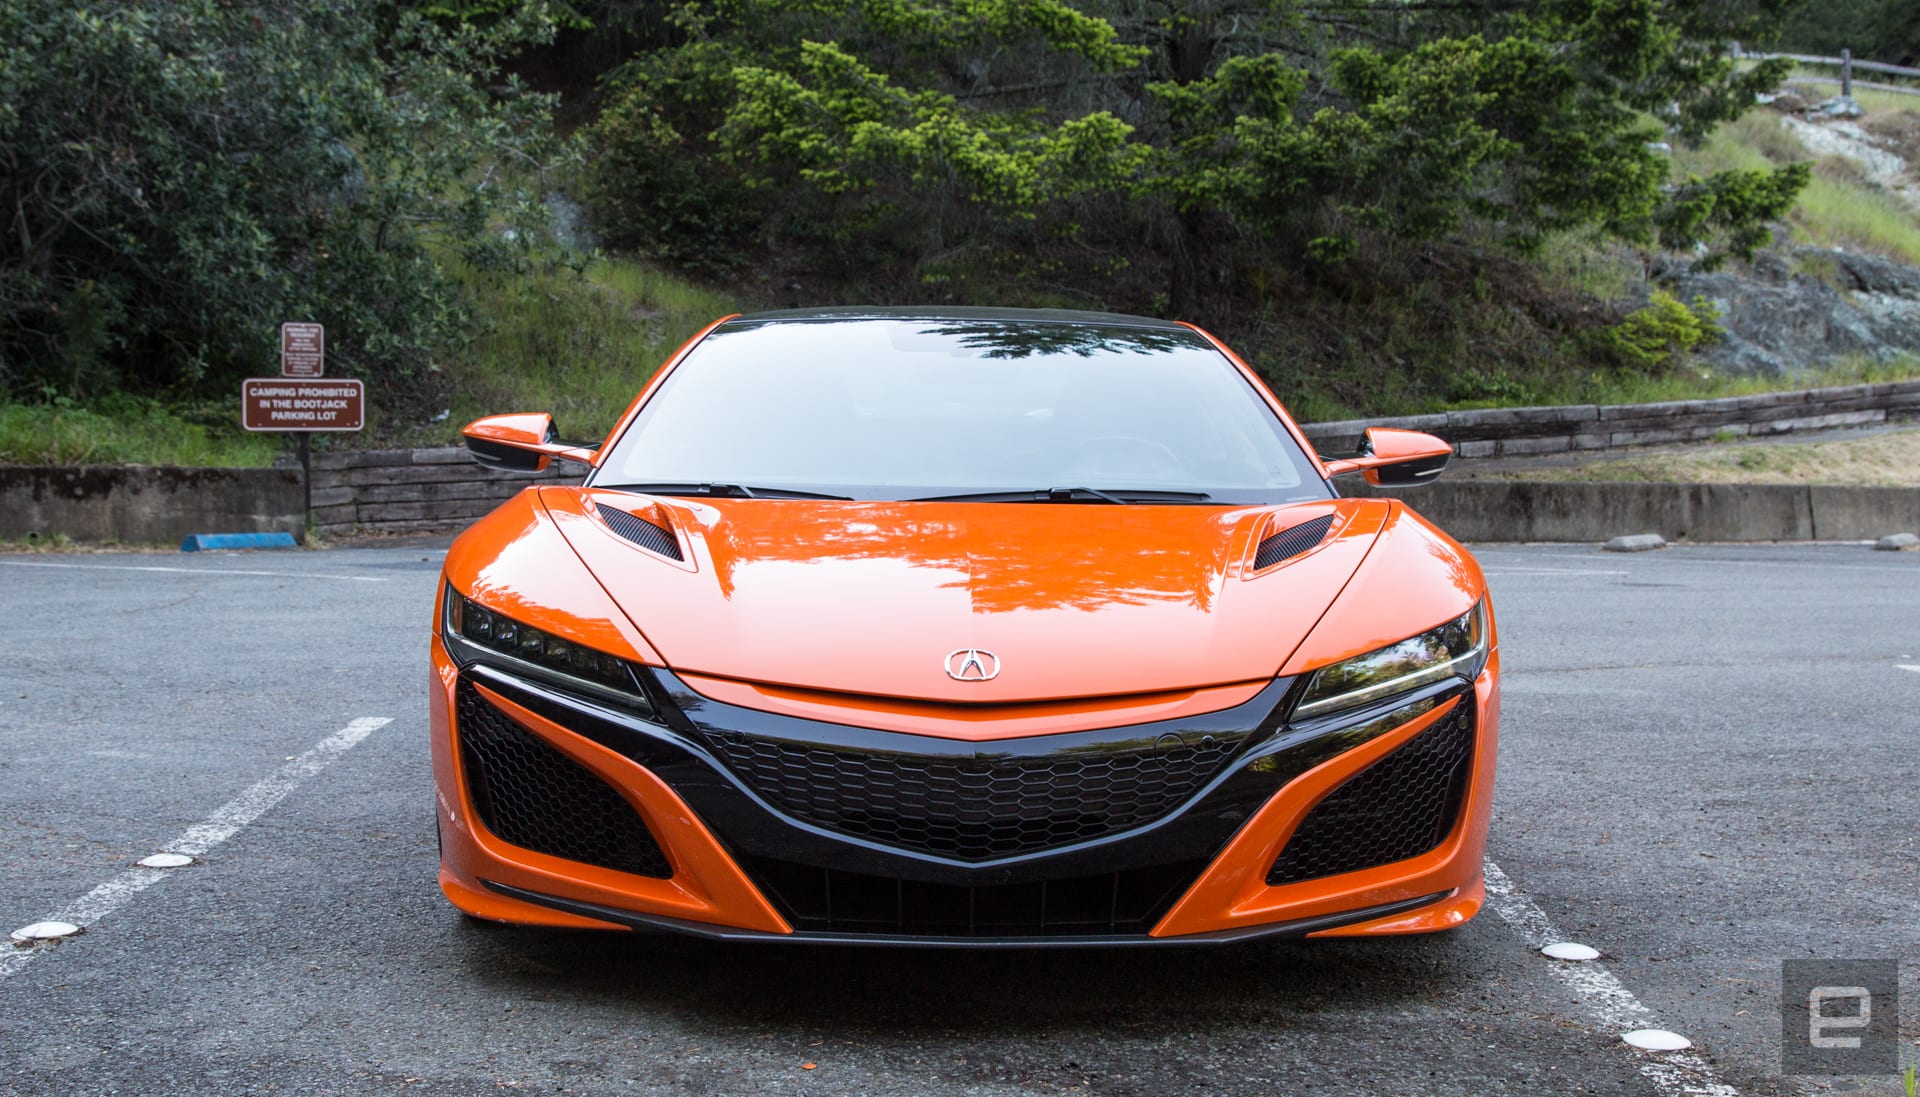 2019 Acura NSX review